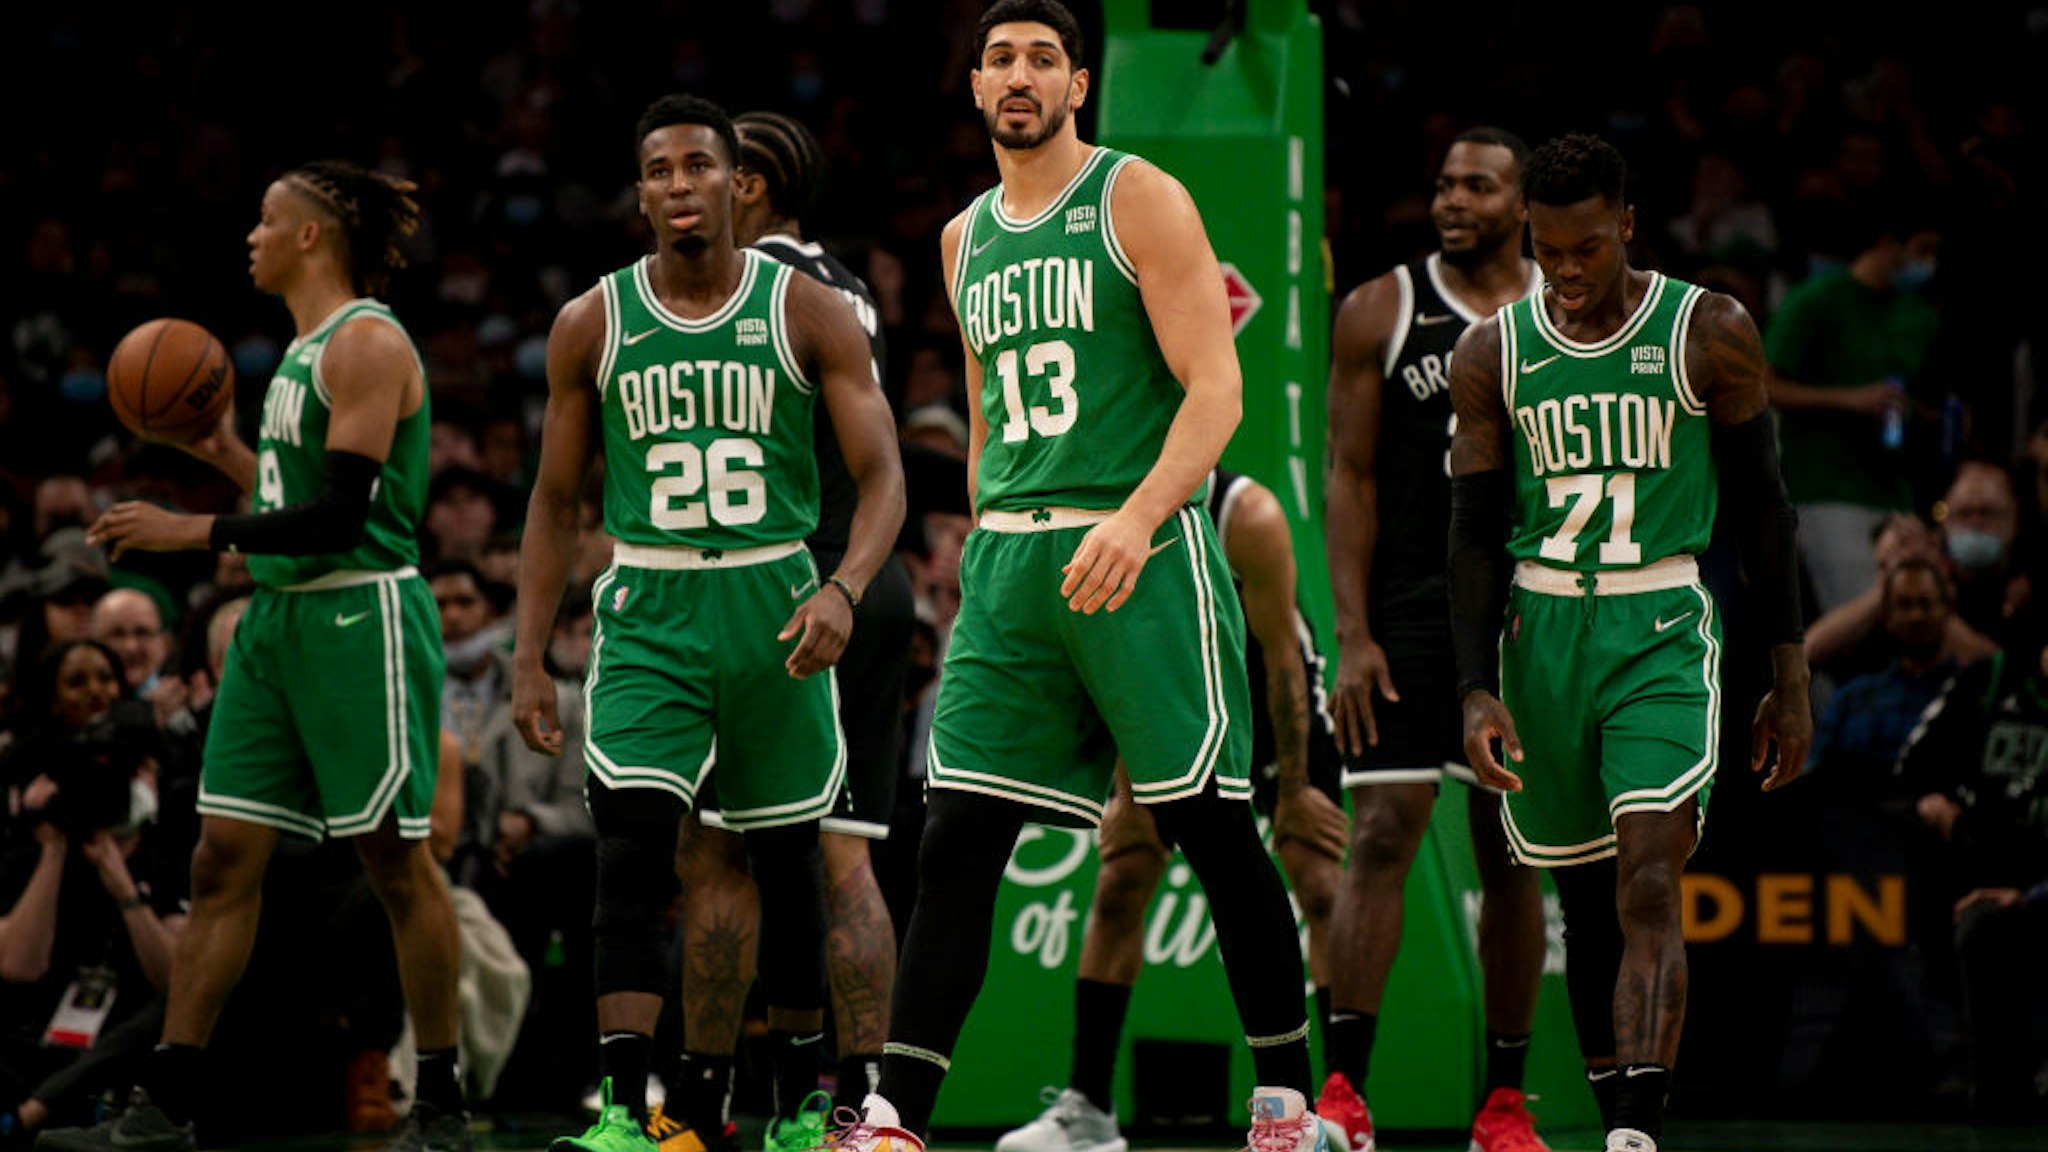 BOSTON, MASSACHUSETTS - NOVEMBER 24: Enes Kanter #13 of the Boston Celtics looks on during a game against the Brooklyn Nets at TD Garden on November 24, 2021 in Boston, Massachusetts. NOTE TO USER: User expressly acknowledges and agrees that, by downloading and or using this photograph, User is consenting to the terms and conditions of the Getty Images License Agreement. (Photo by Maddie Malhotra/Getty Images)